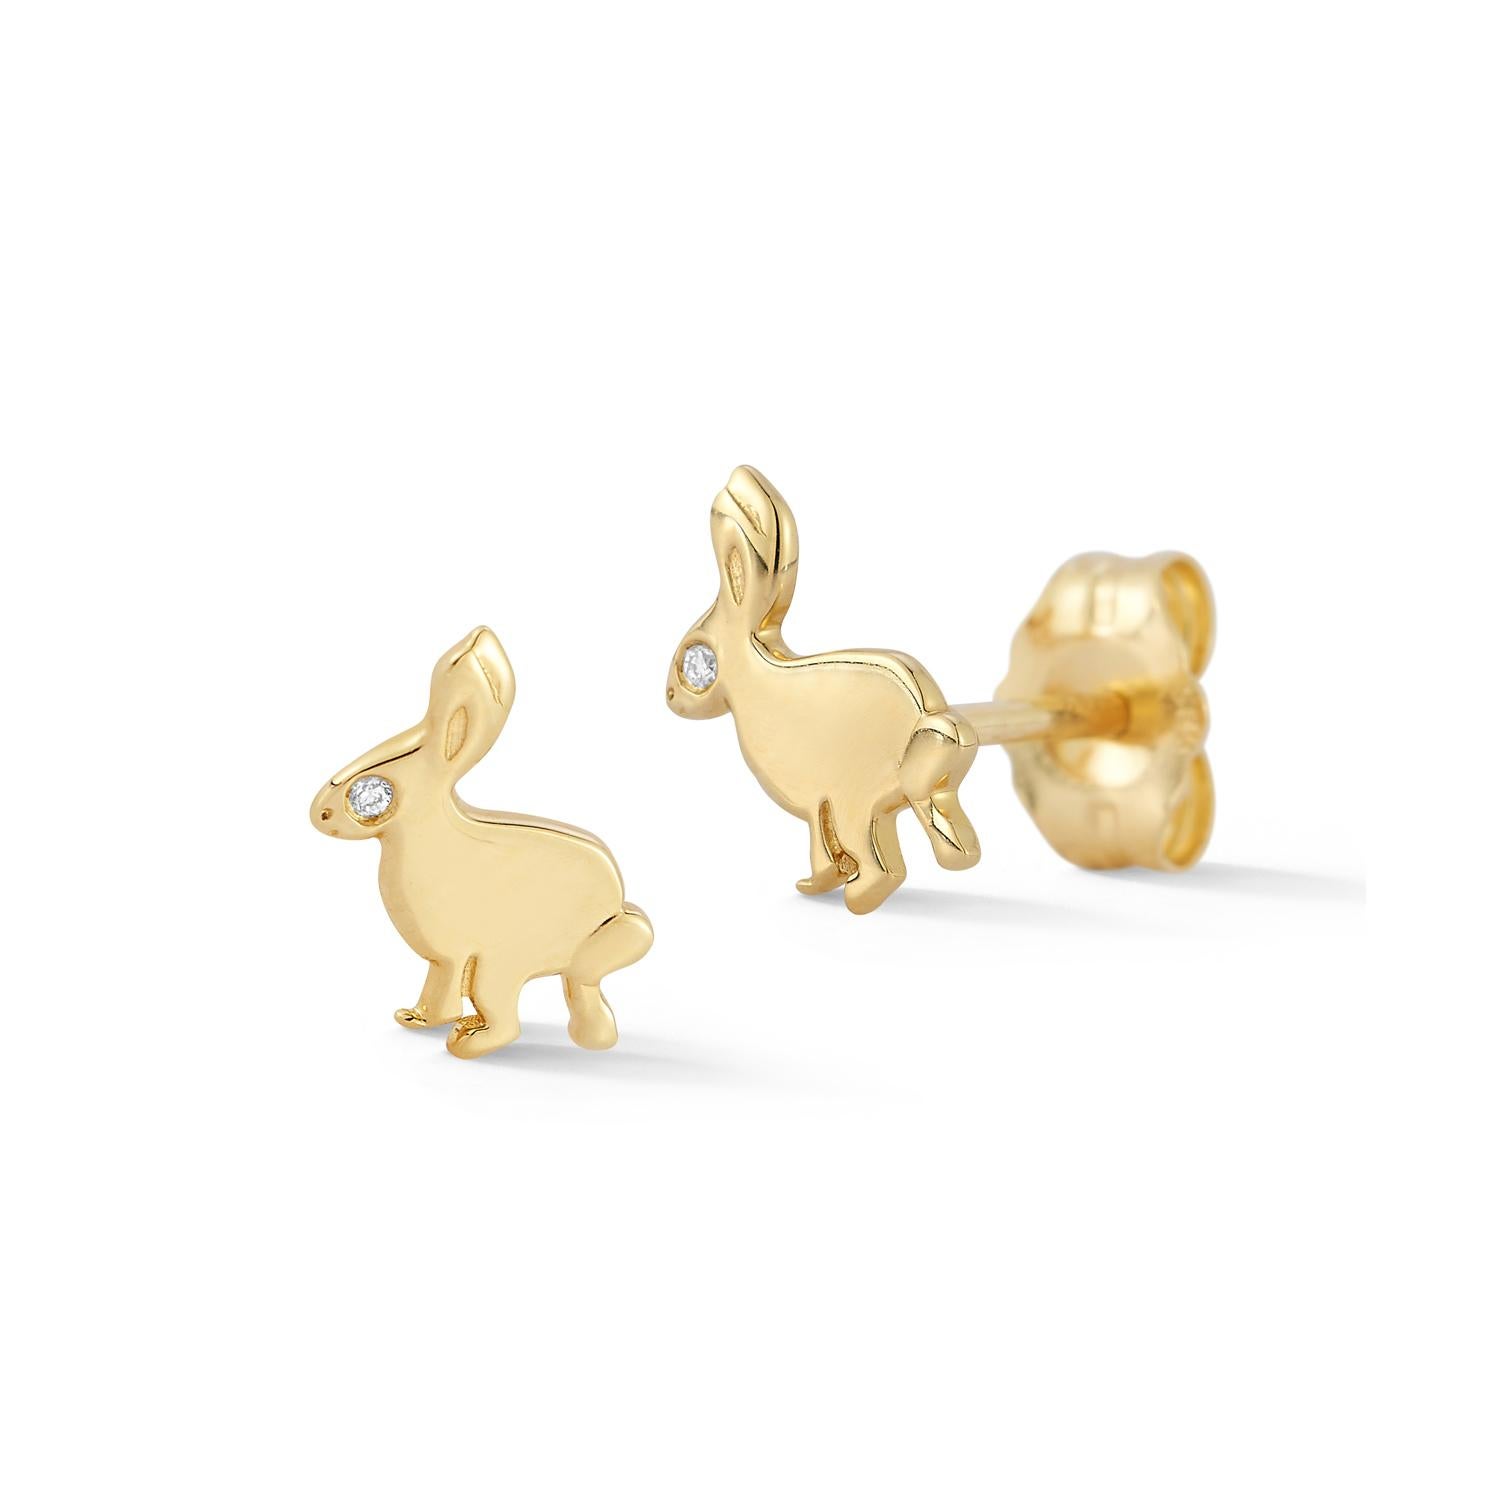 Round Cut 14 karat yellow gold small Bunny stud earrings with diamond eyes For Sale